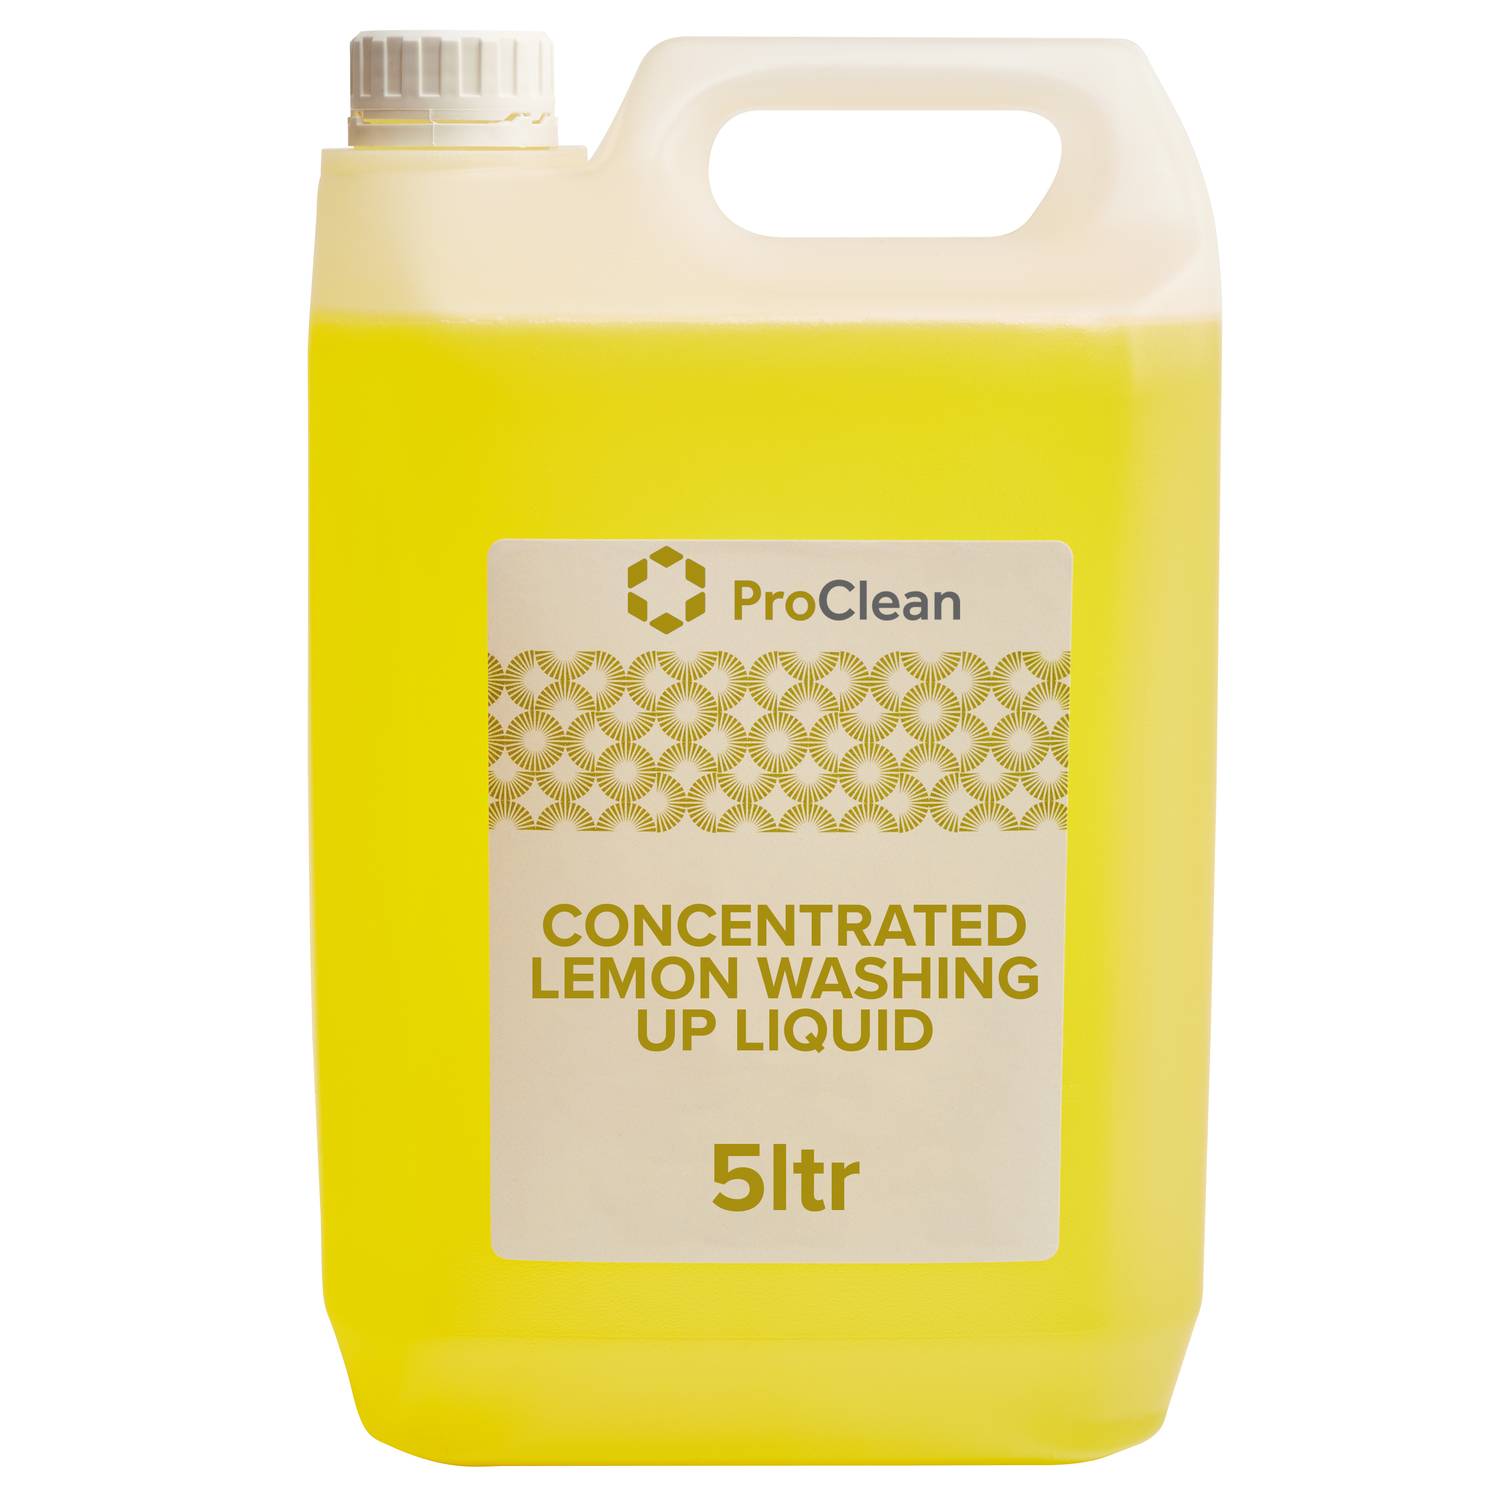 ProClean 20% Concentrated Lemon Washing Up Liquid  (2 x 5L)